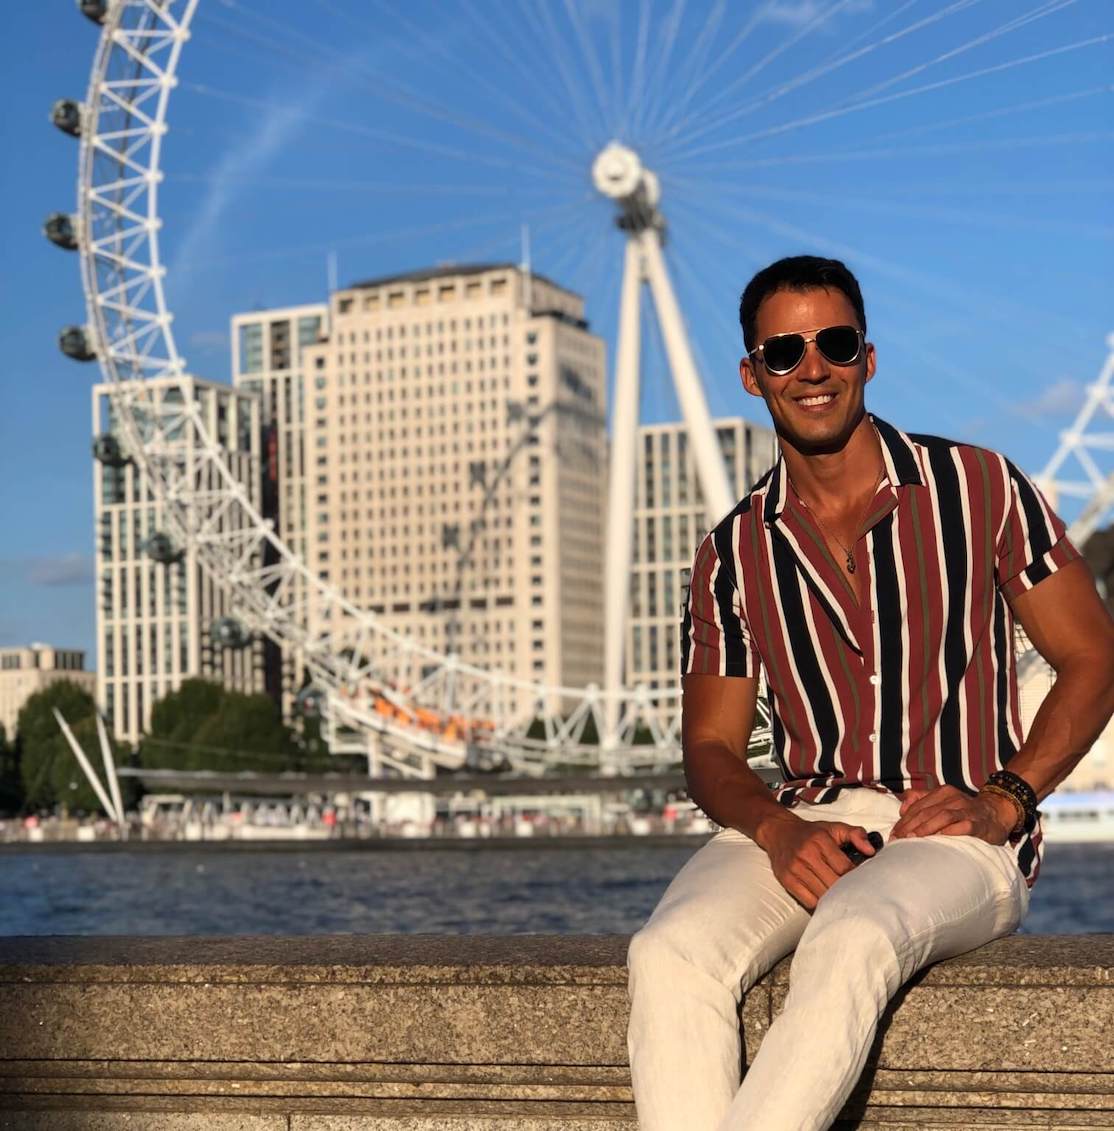 Pericles Rosa wearing sunglasses and stripe shirt posing to take a picture along the River Thames with the London Eye in the background